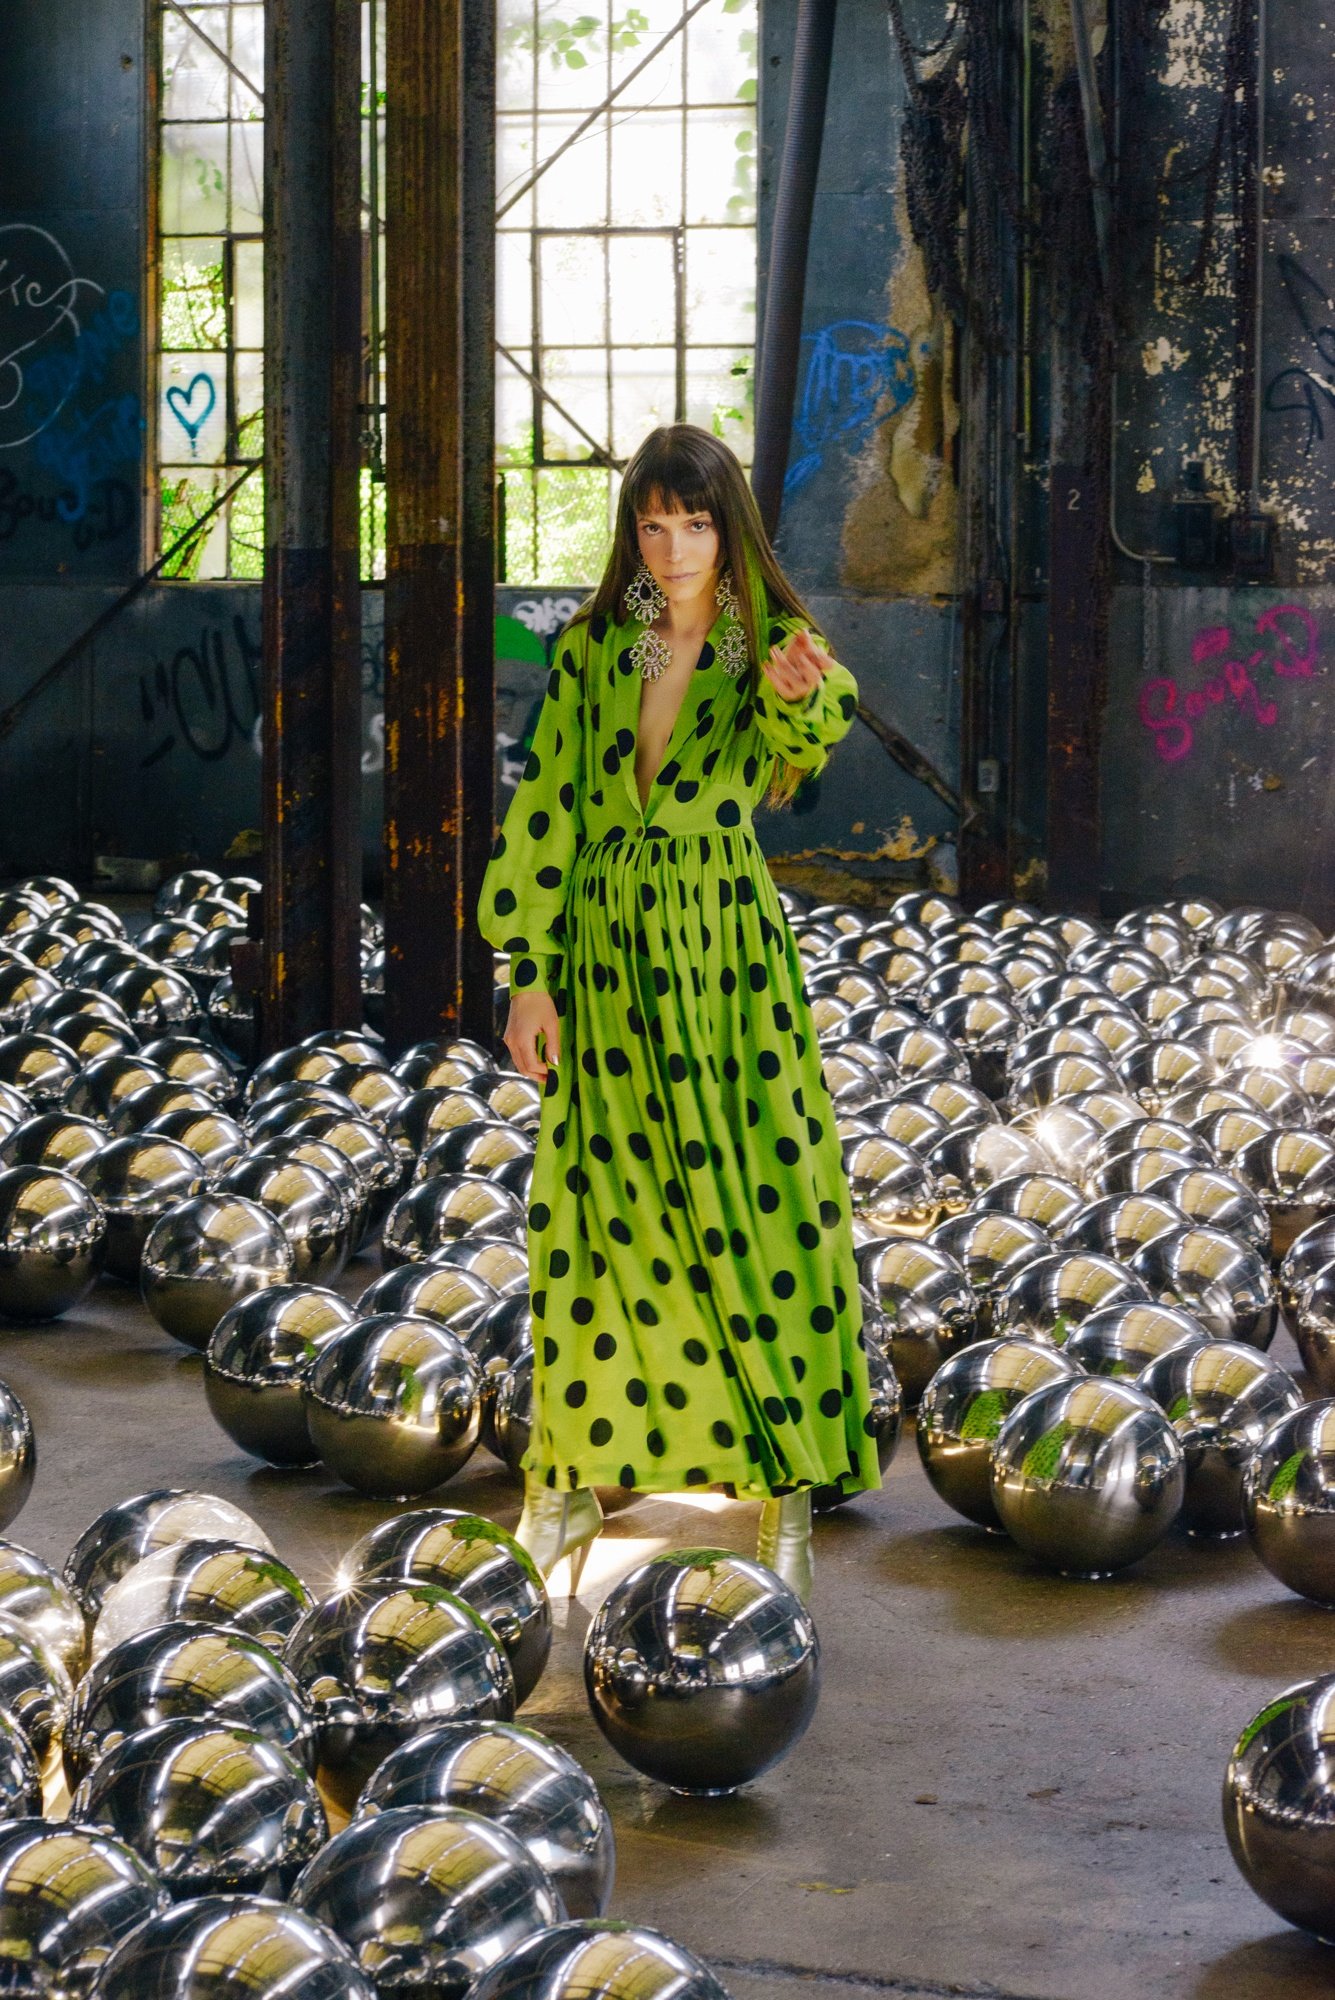 Pari Ehsan wearing a Todd Oldham dress with black polka dots and green satin amongst Yayoi Kusama's Narcissus Garden installation in New York last summer.